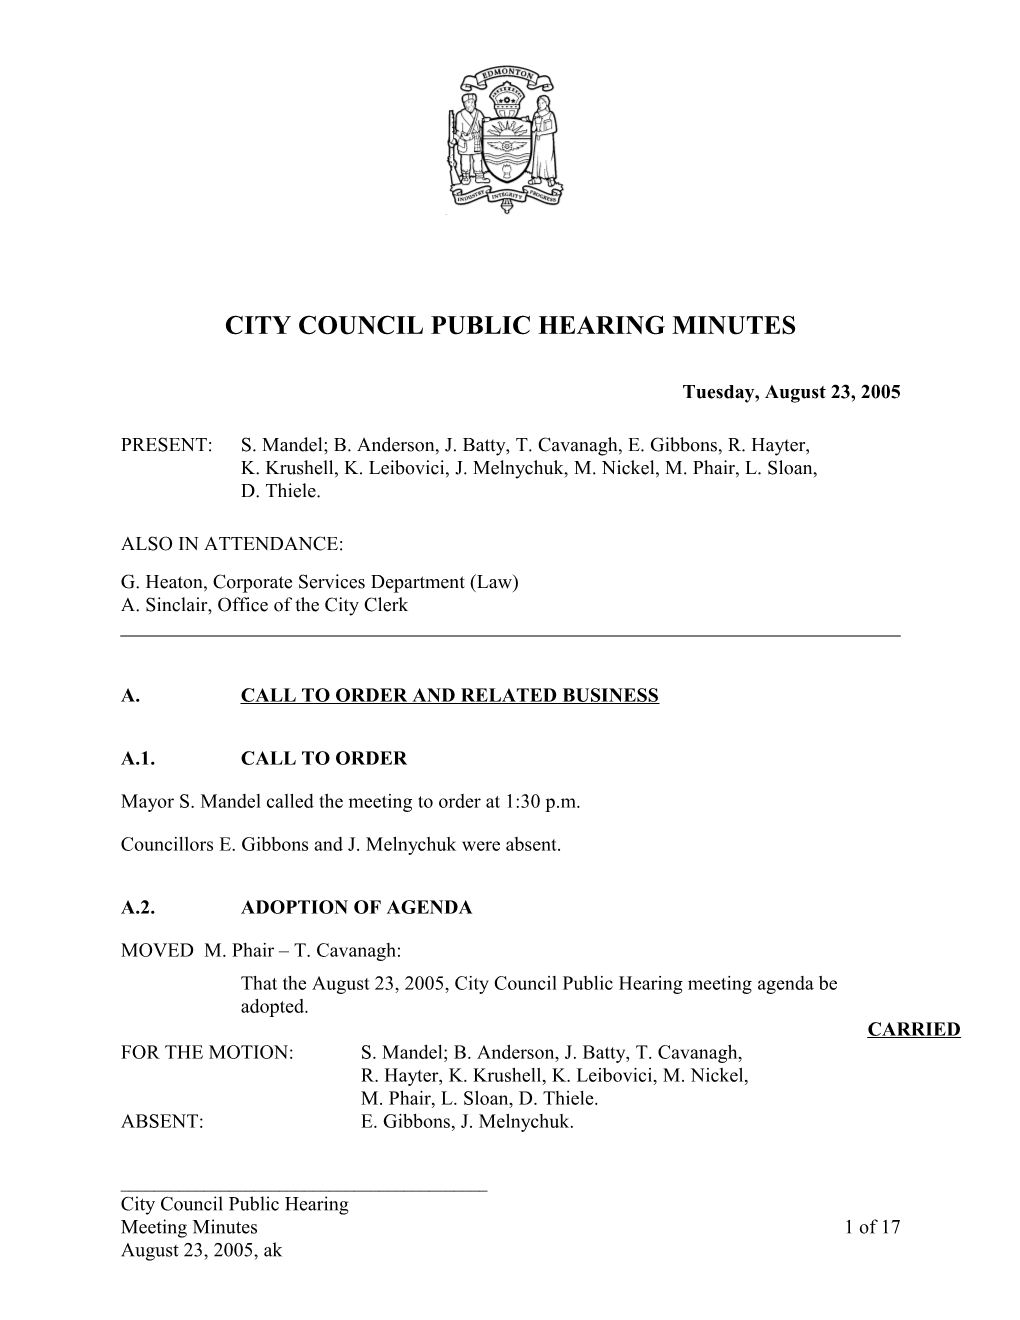 Minutes for City Council August 23, 2005 Meeting